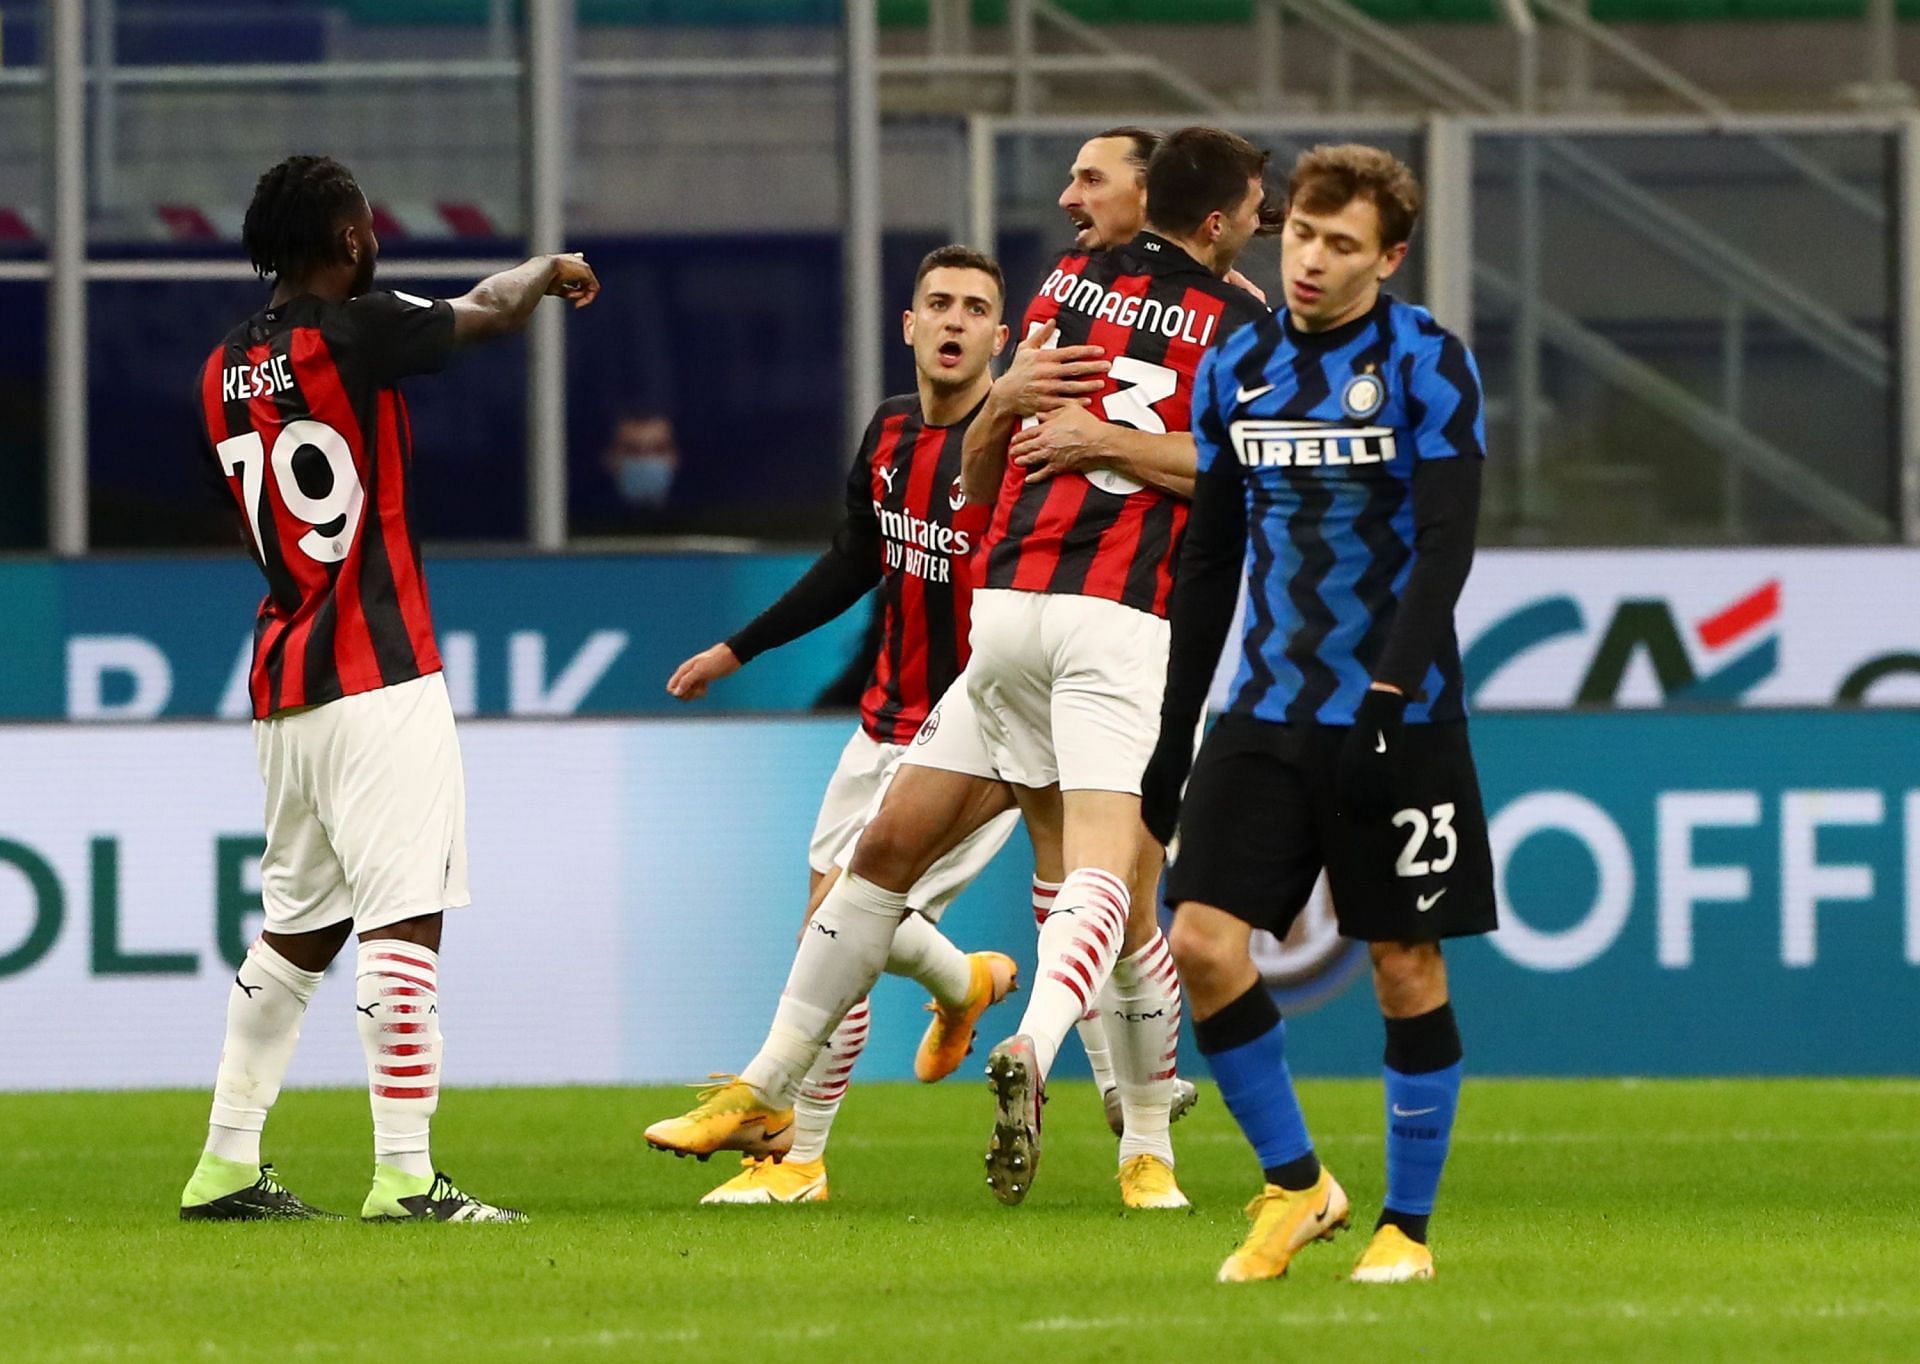 Inter milan v ac milan betting preview on betfair best cryptocurrency chart website